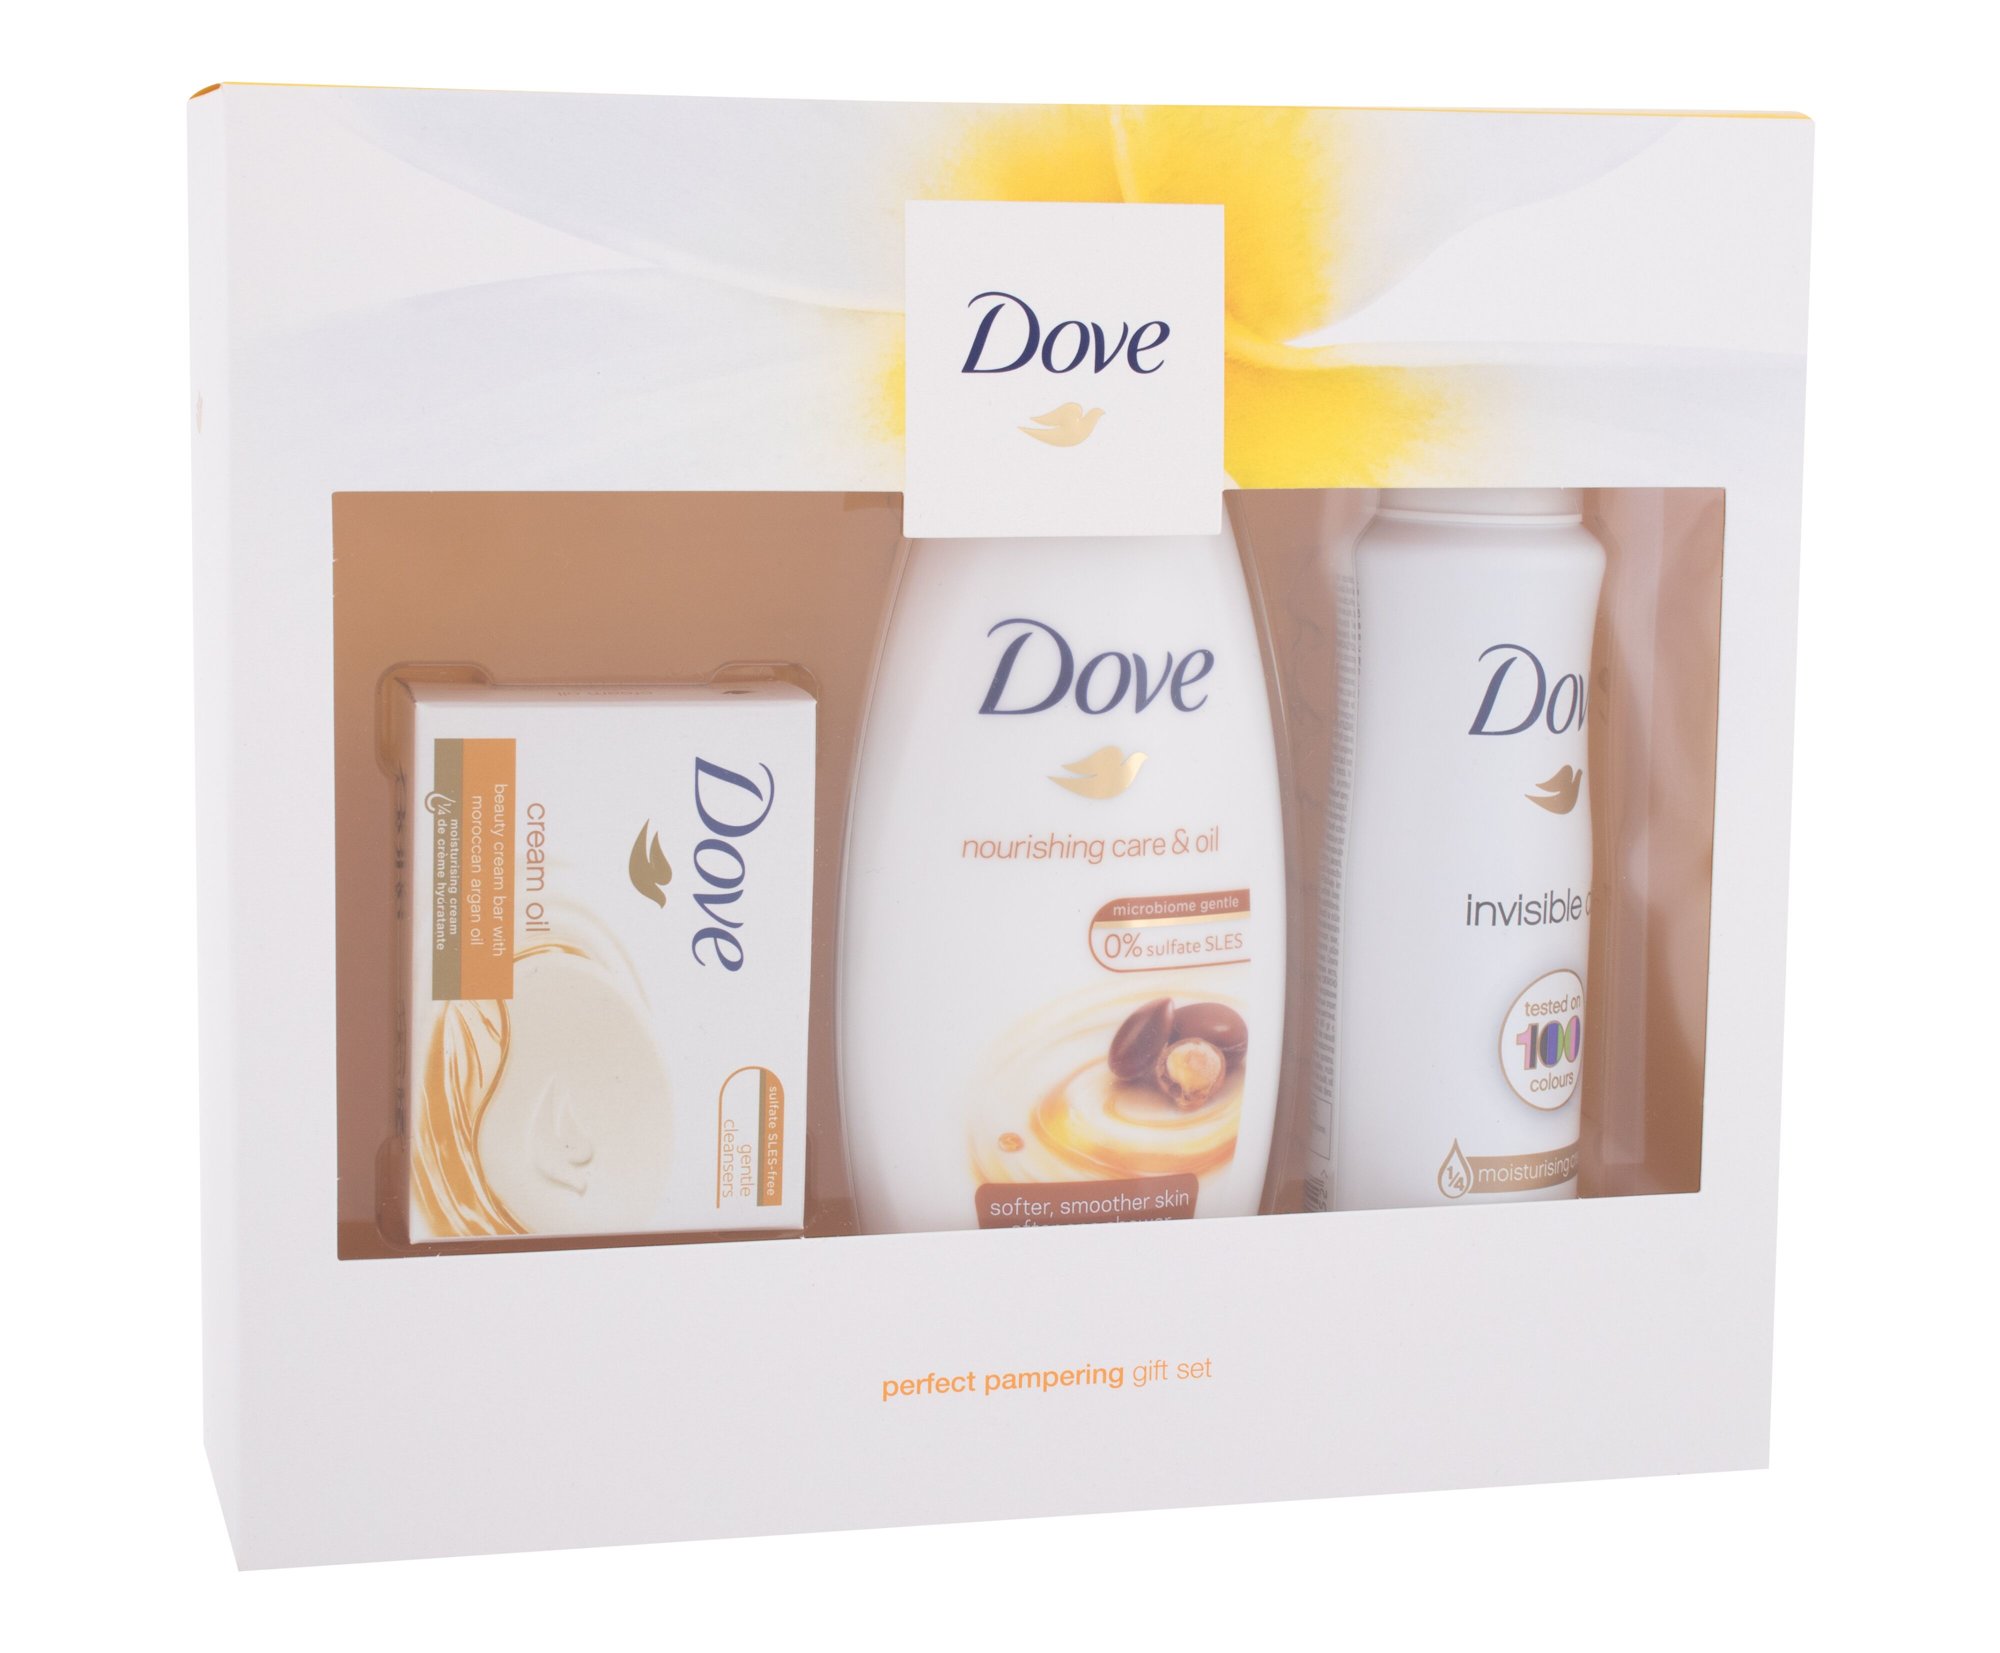 Dove Perfect Pampering Gift Set 250ml Shower Gel Nourishing Care & Oil 250 ml + Soap Cream Oil Moroccan Argan Oil 100 g + Antiperspirant Invisible Dry Clean Touch 150 ml dušo želė Rinkinys (Pažeista pakuotė)